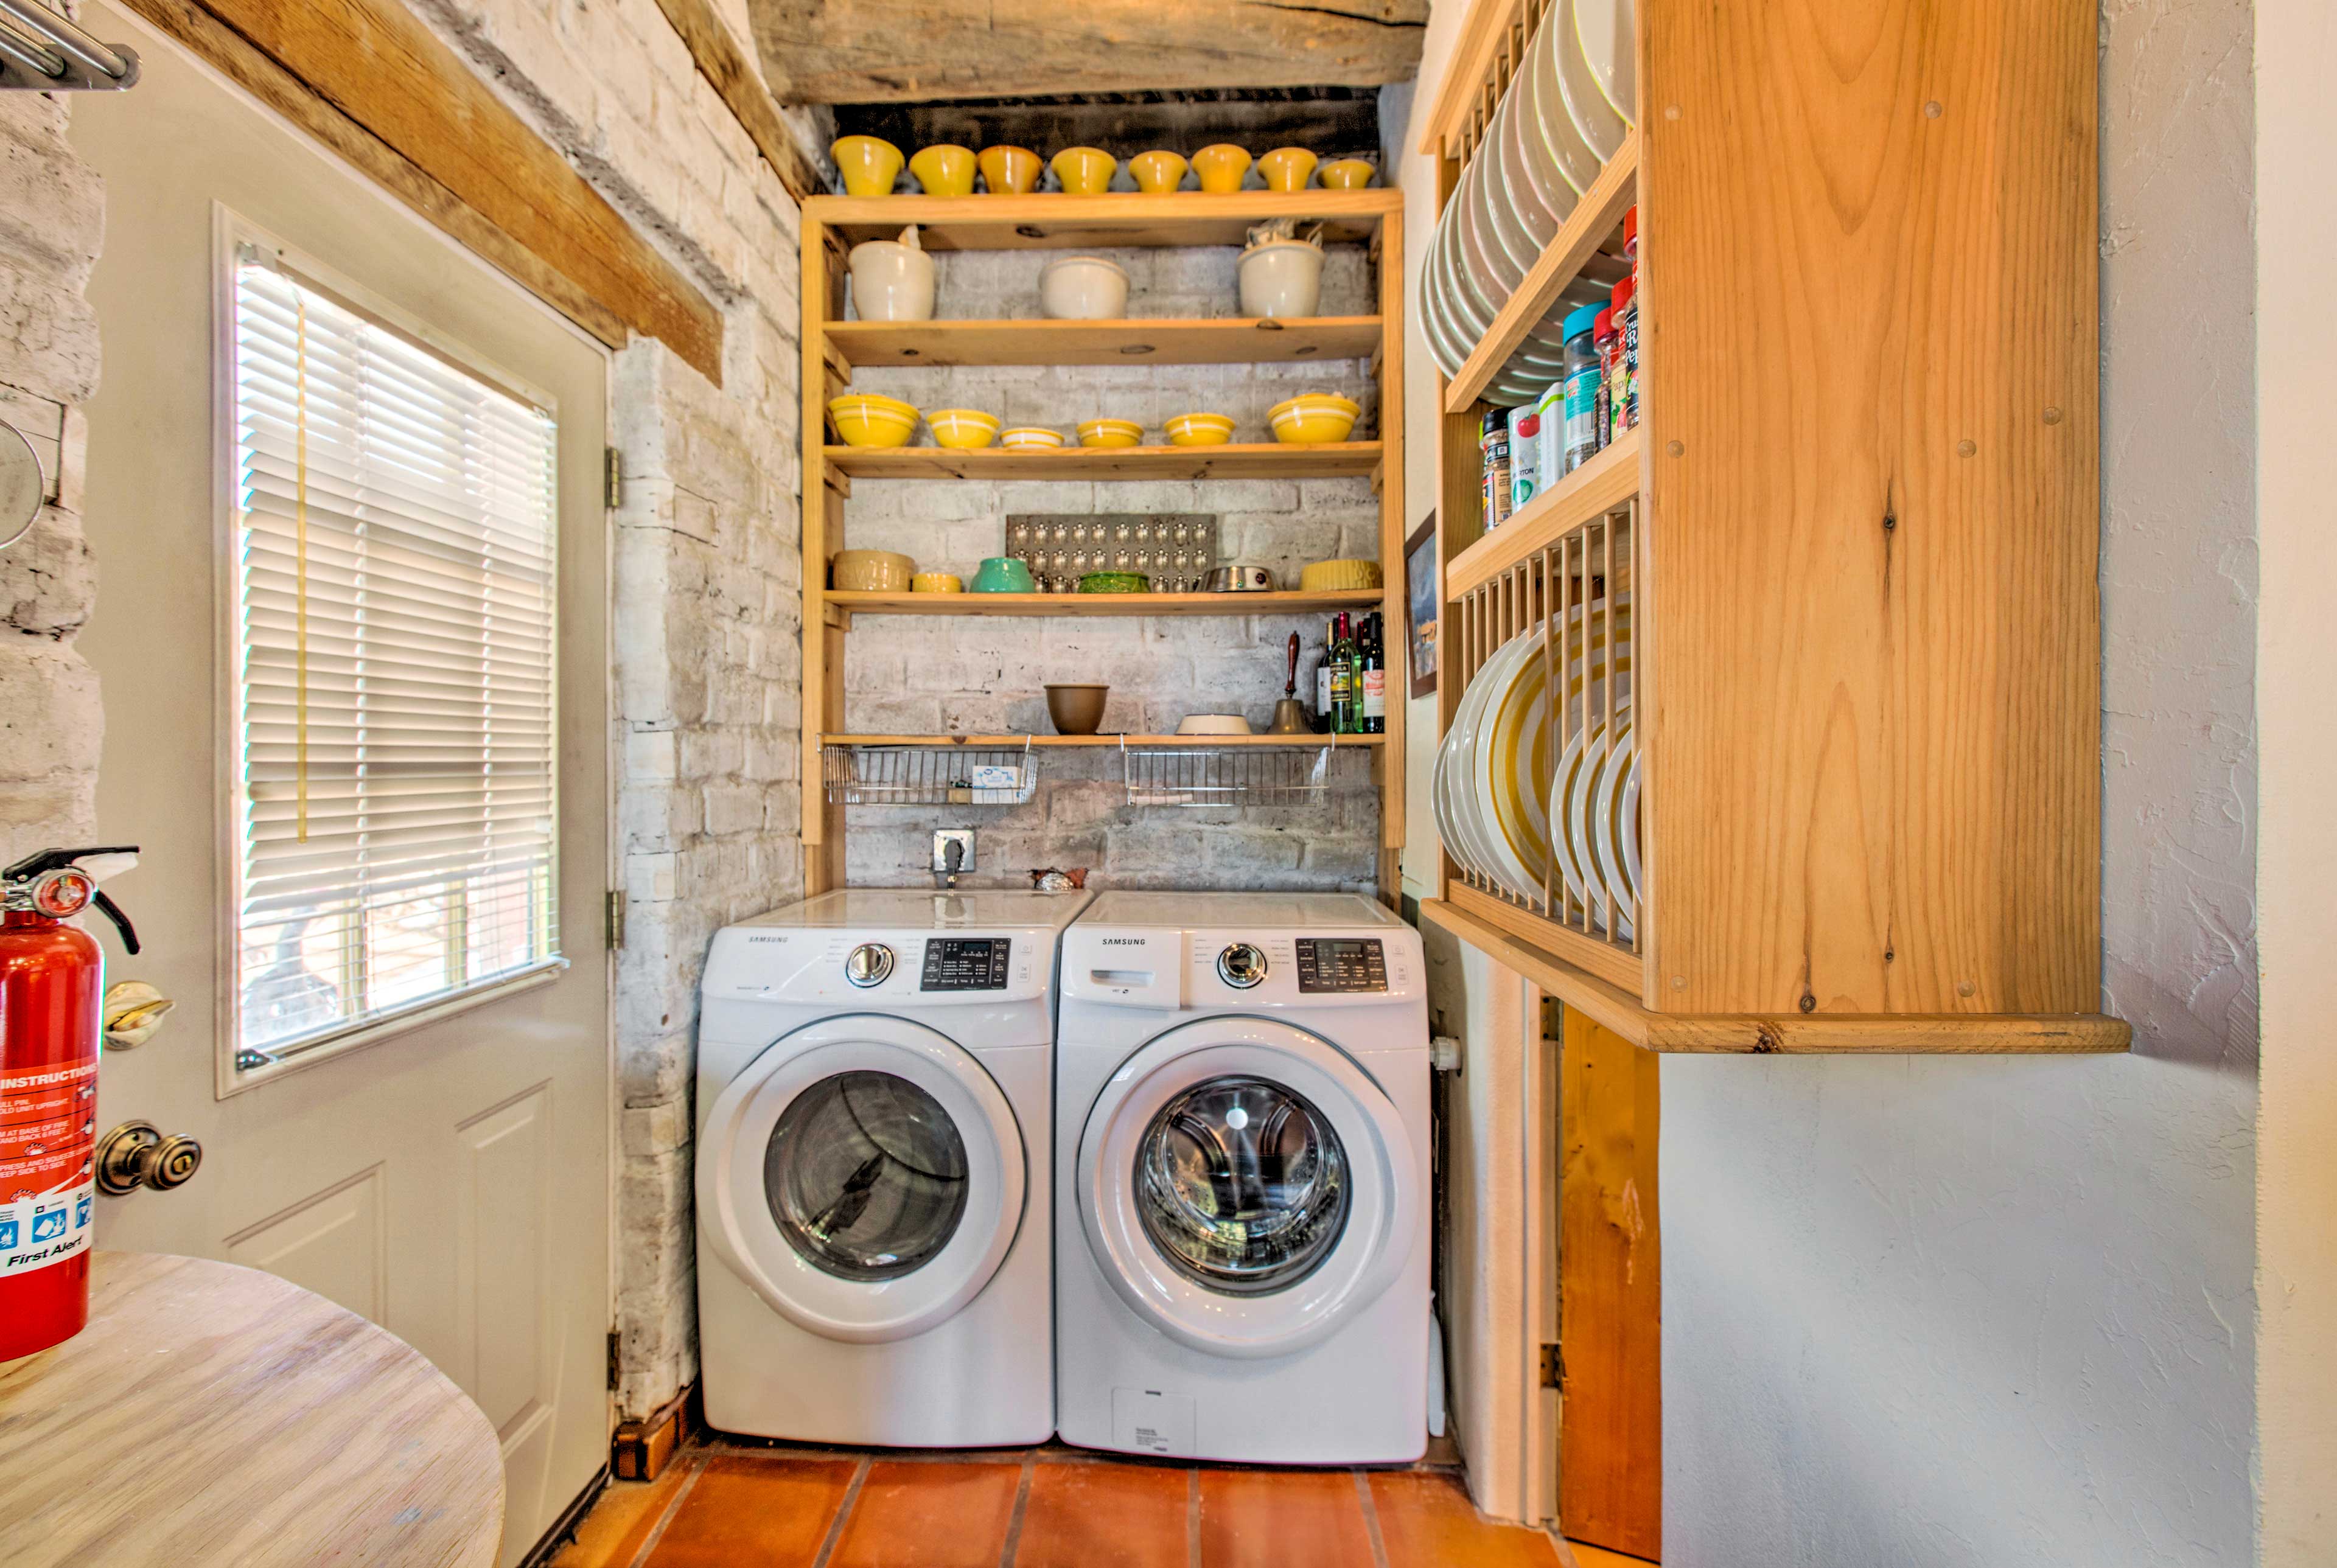 Laundry Area | Laundry Detergent | Iron & Board